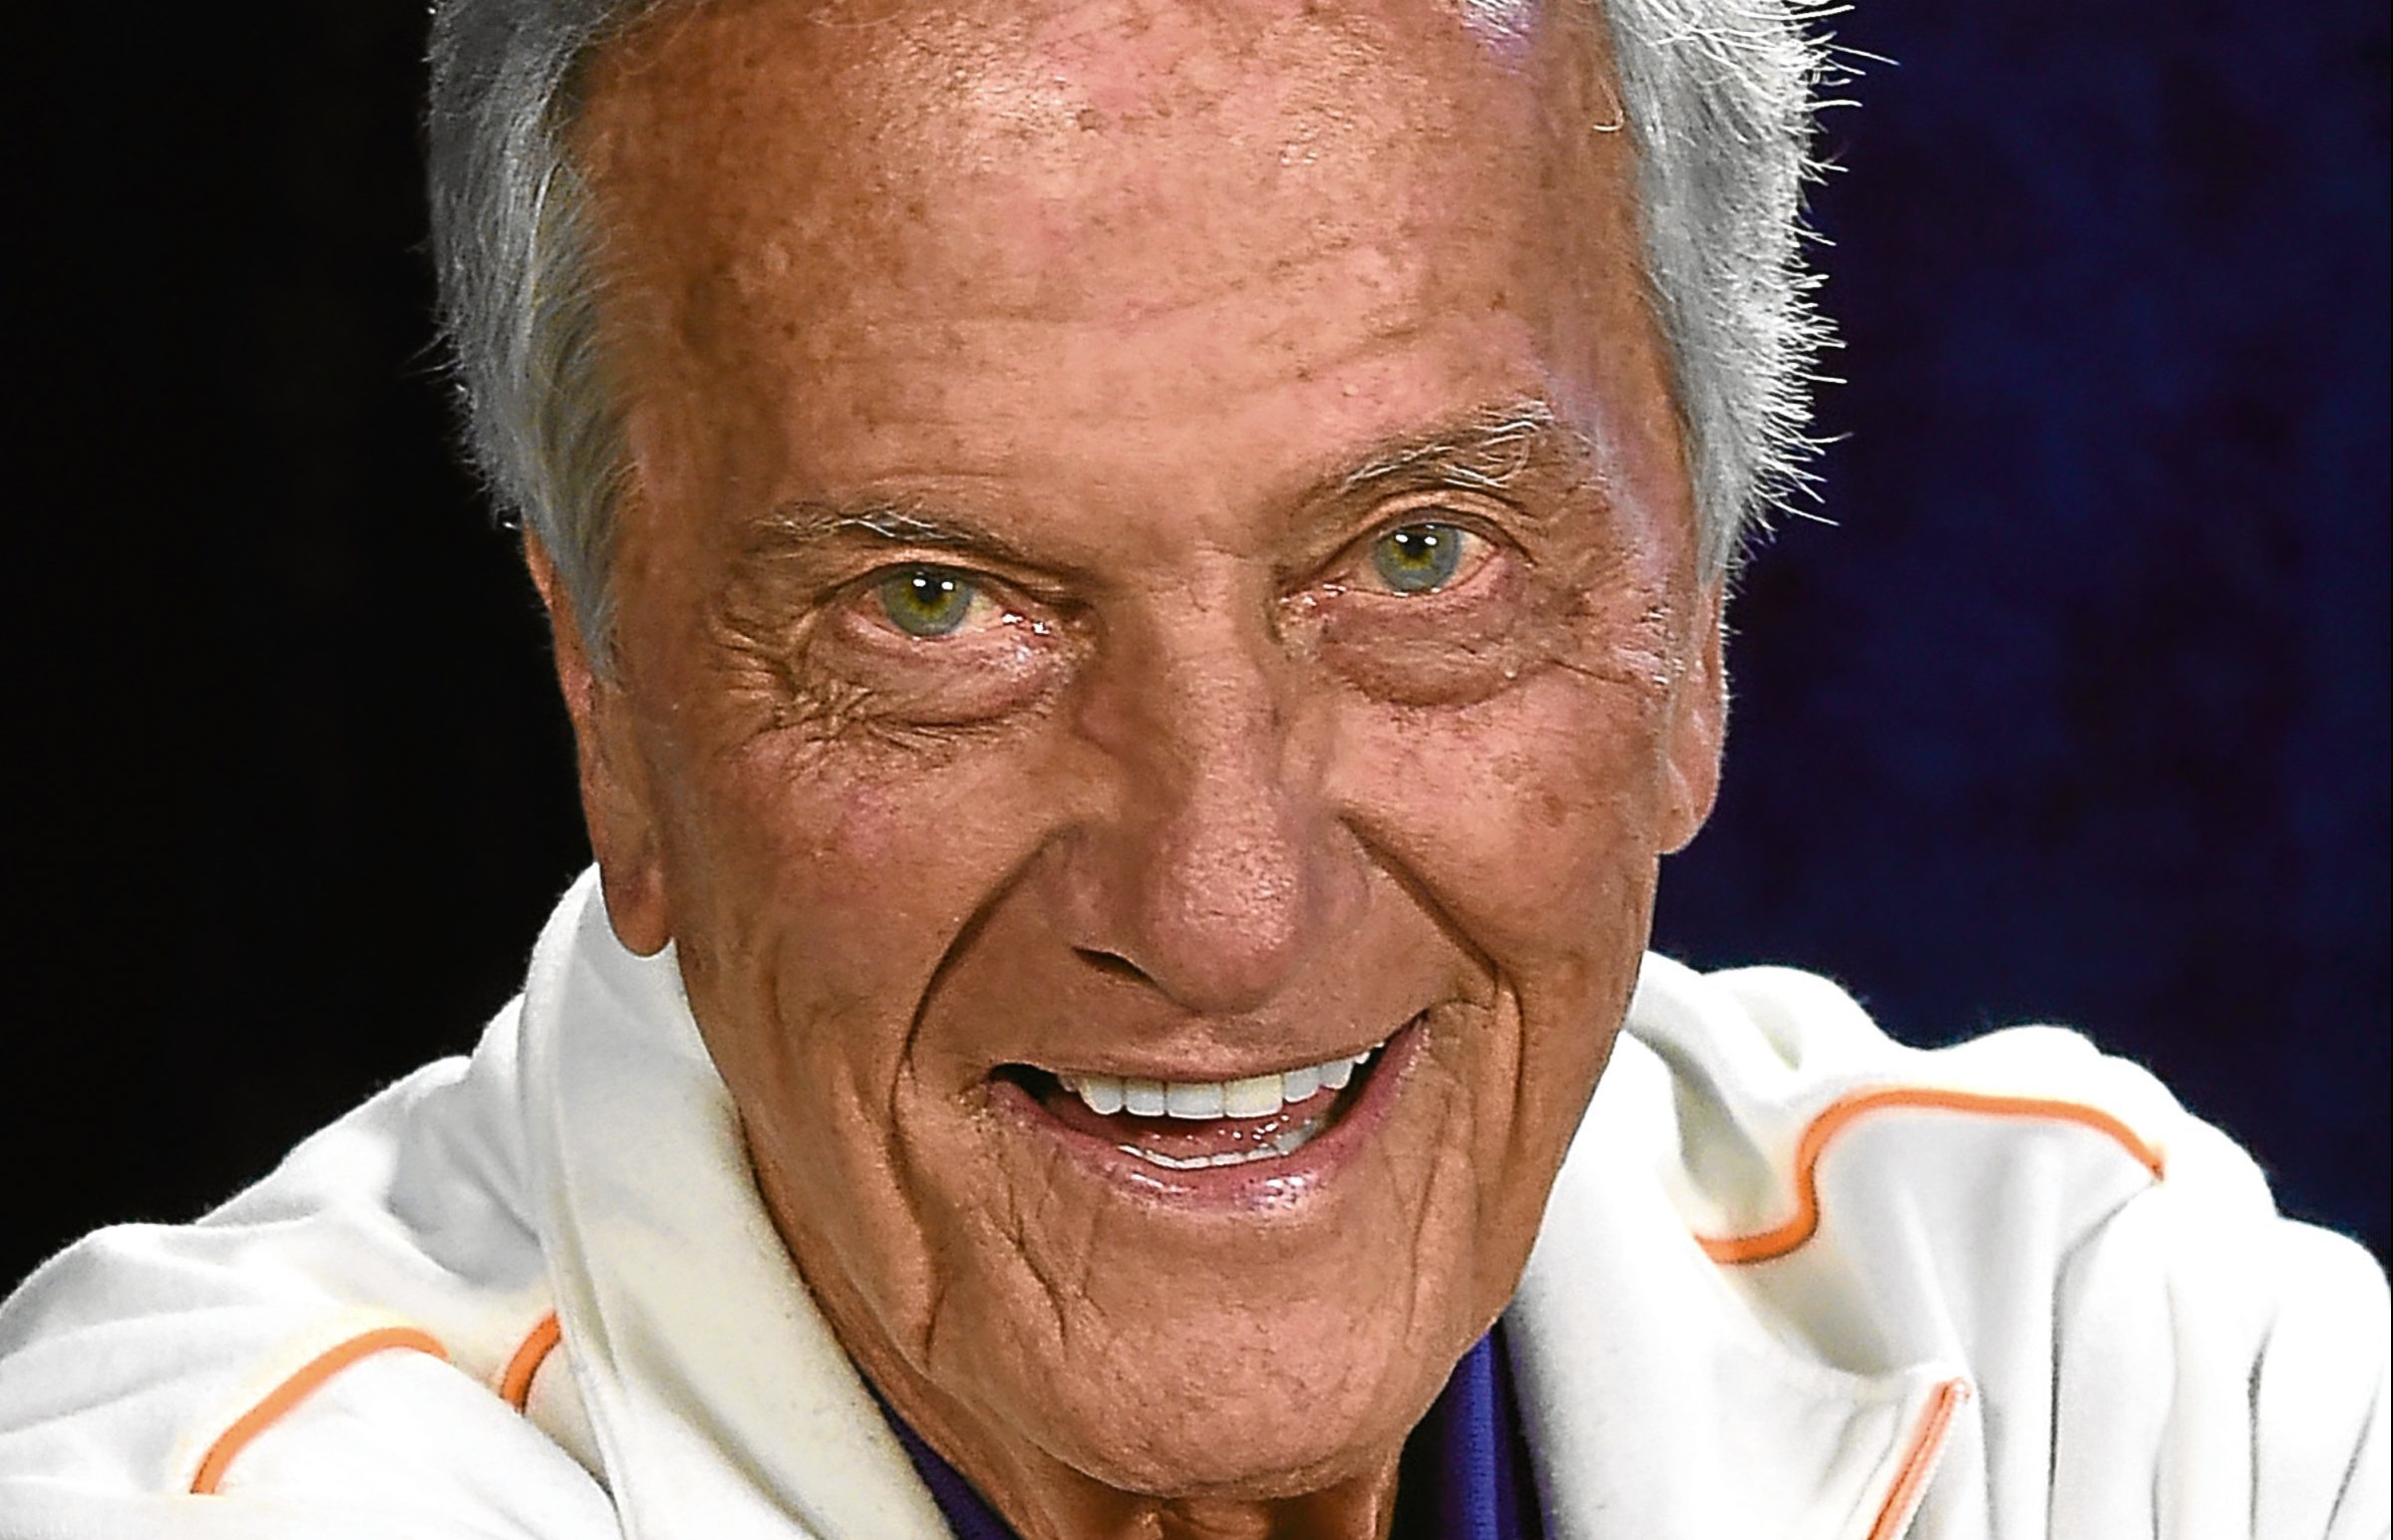 Pat Boone's had a Wonderful Time in 60year career and says he isn't